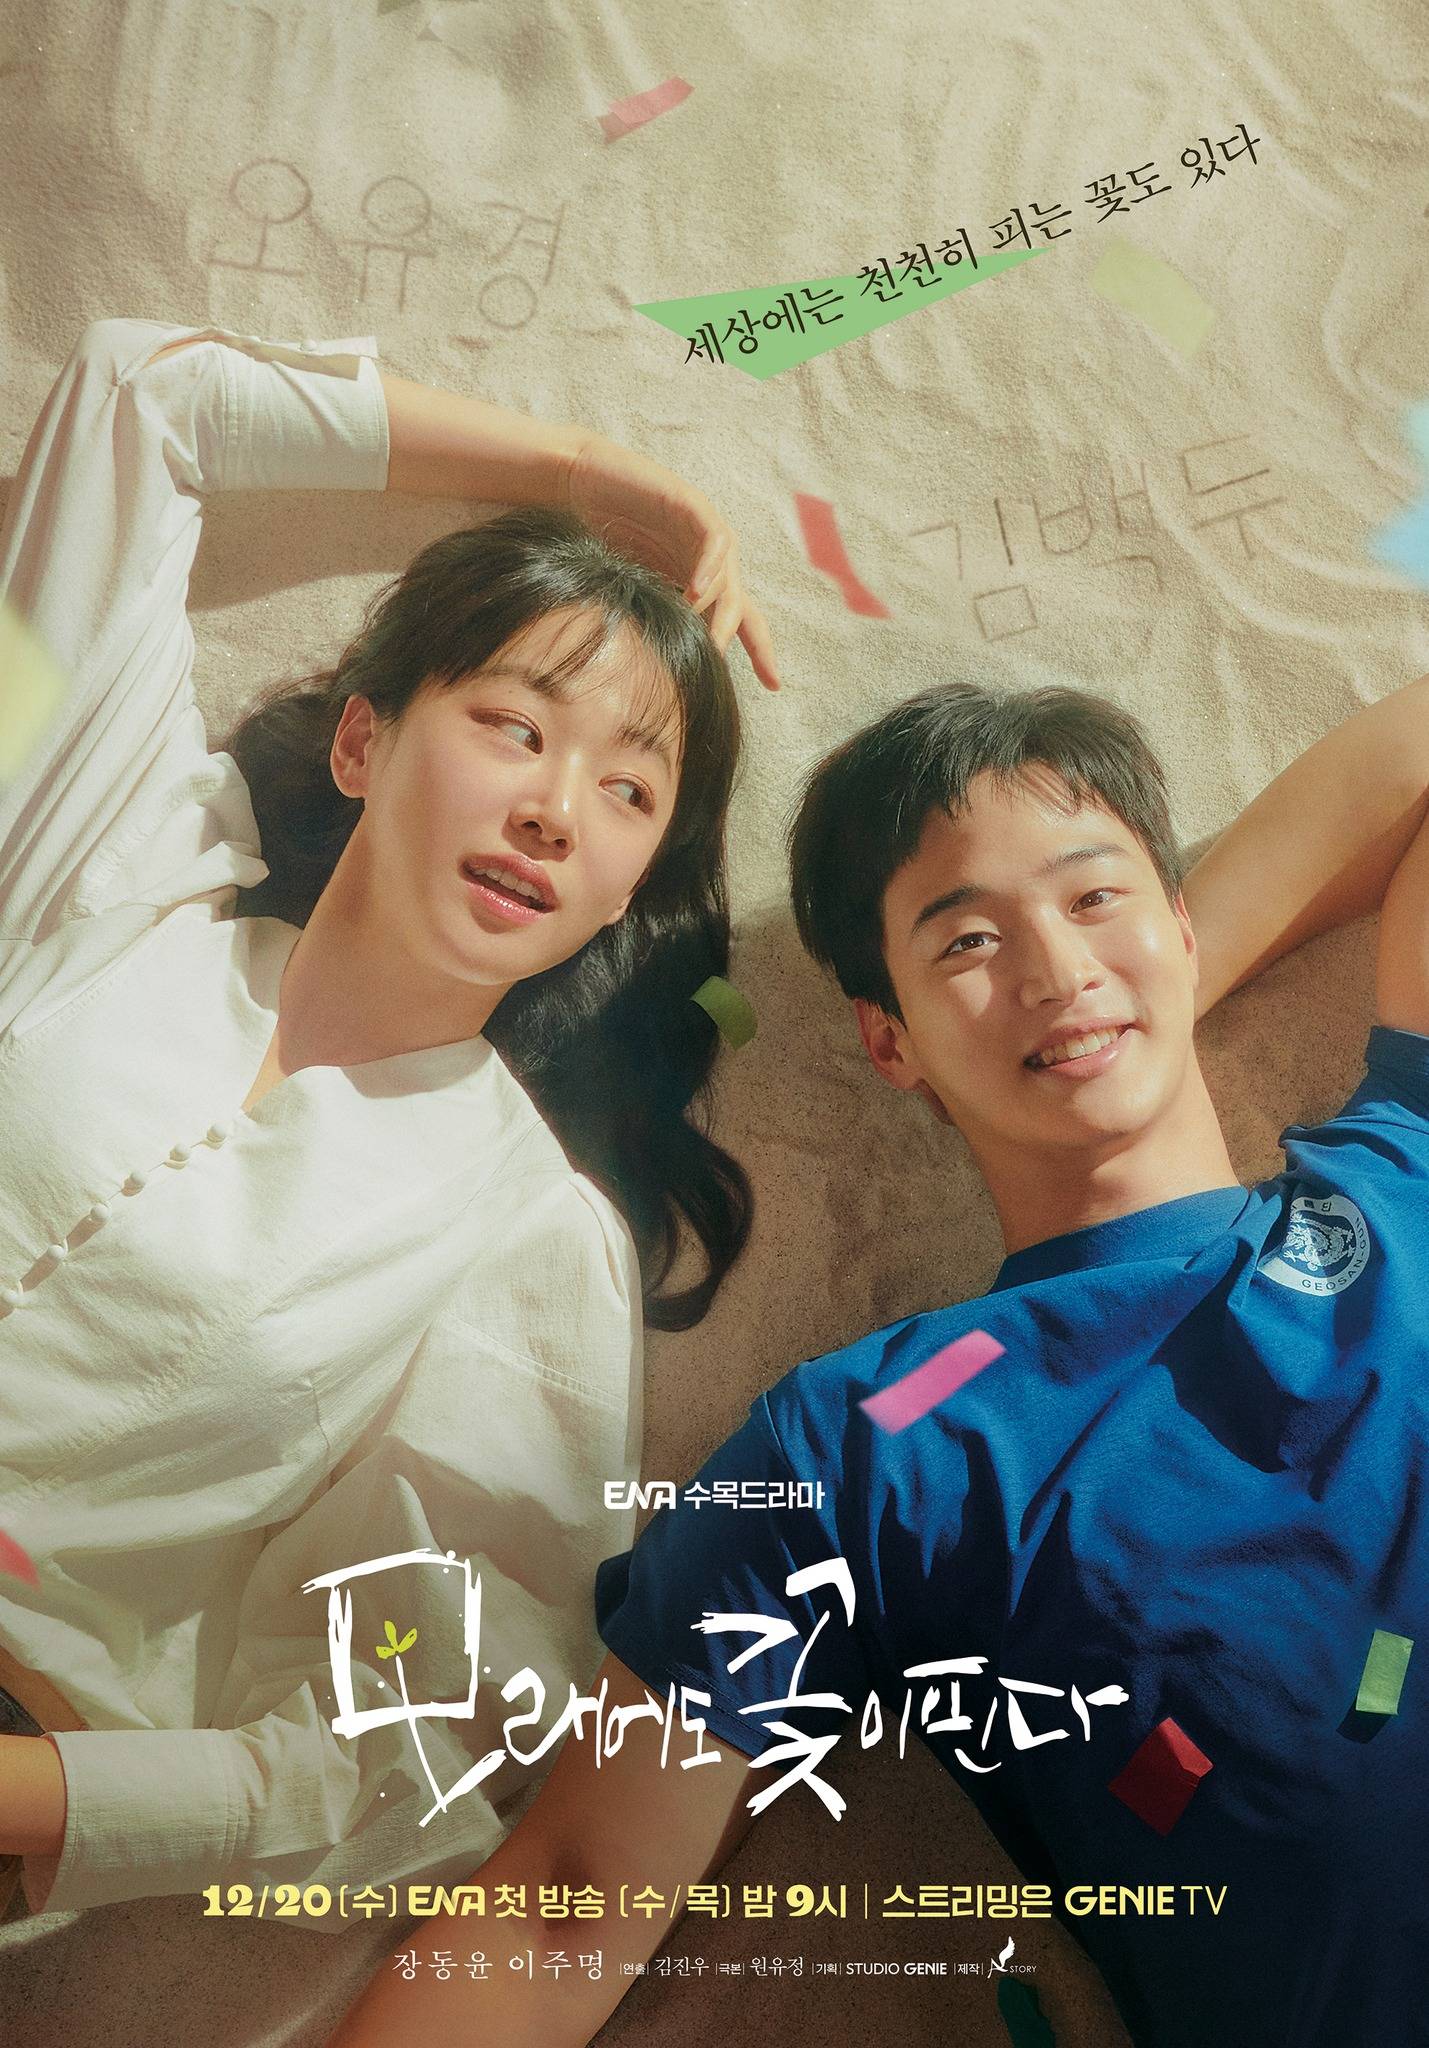 Like Flowers in Sand (December 21) - Streaming on NetflixLike Flowers in Sand follows Kim Baek-du, a renowned wrestler contemplating stepping away from the sport. As he navigates this significant shift, his childhood friend Oh Yoo-kyung becomes a source of support and solace.